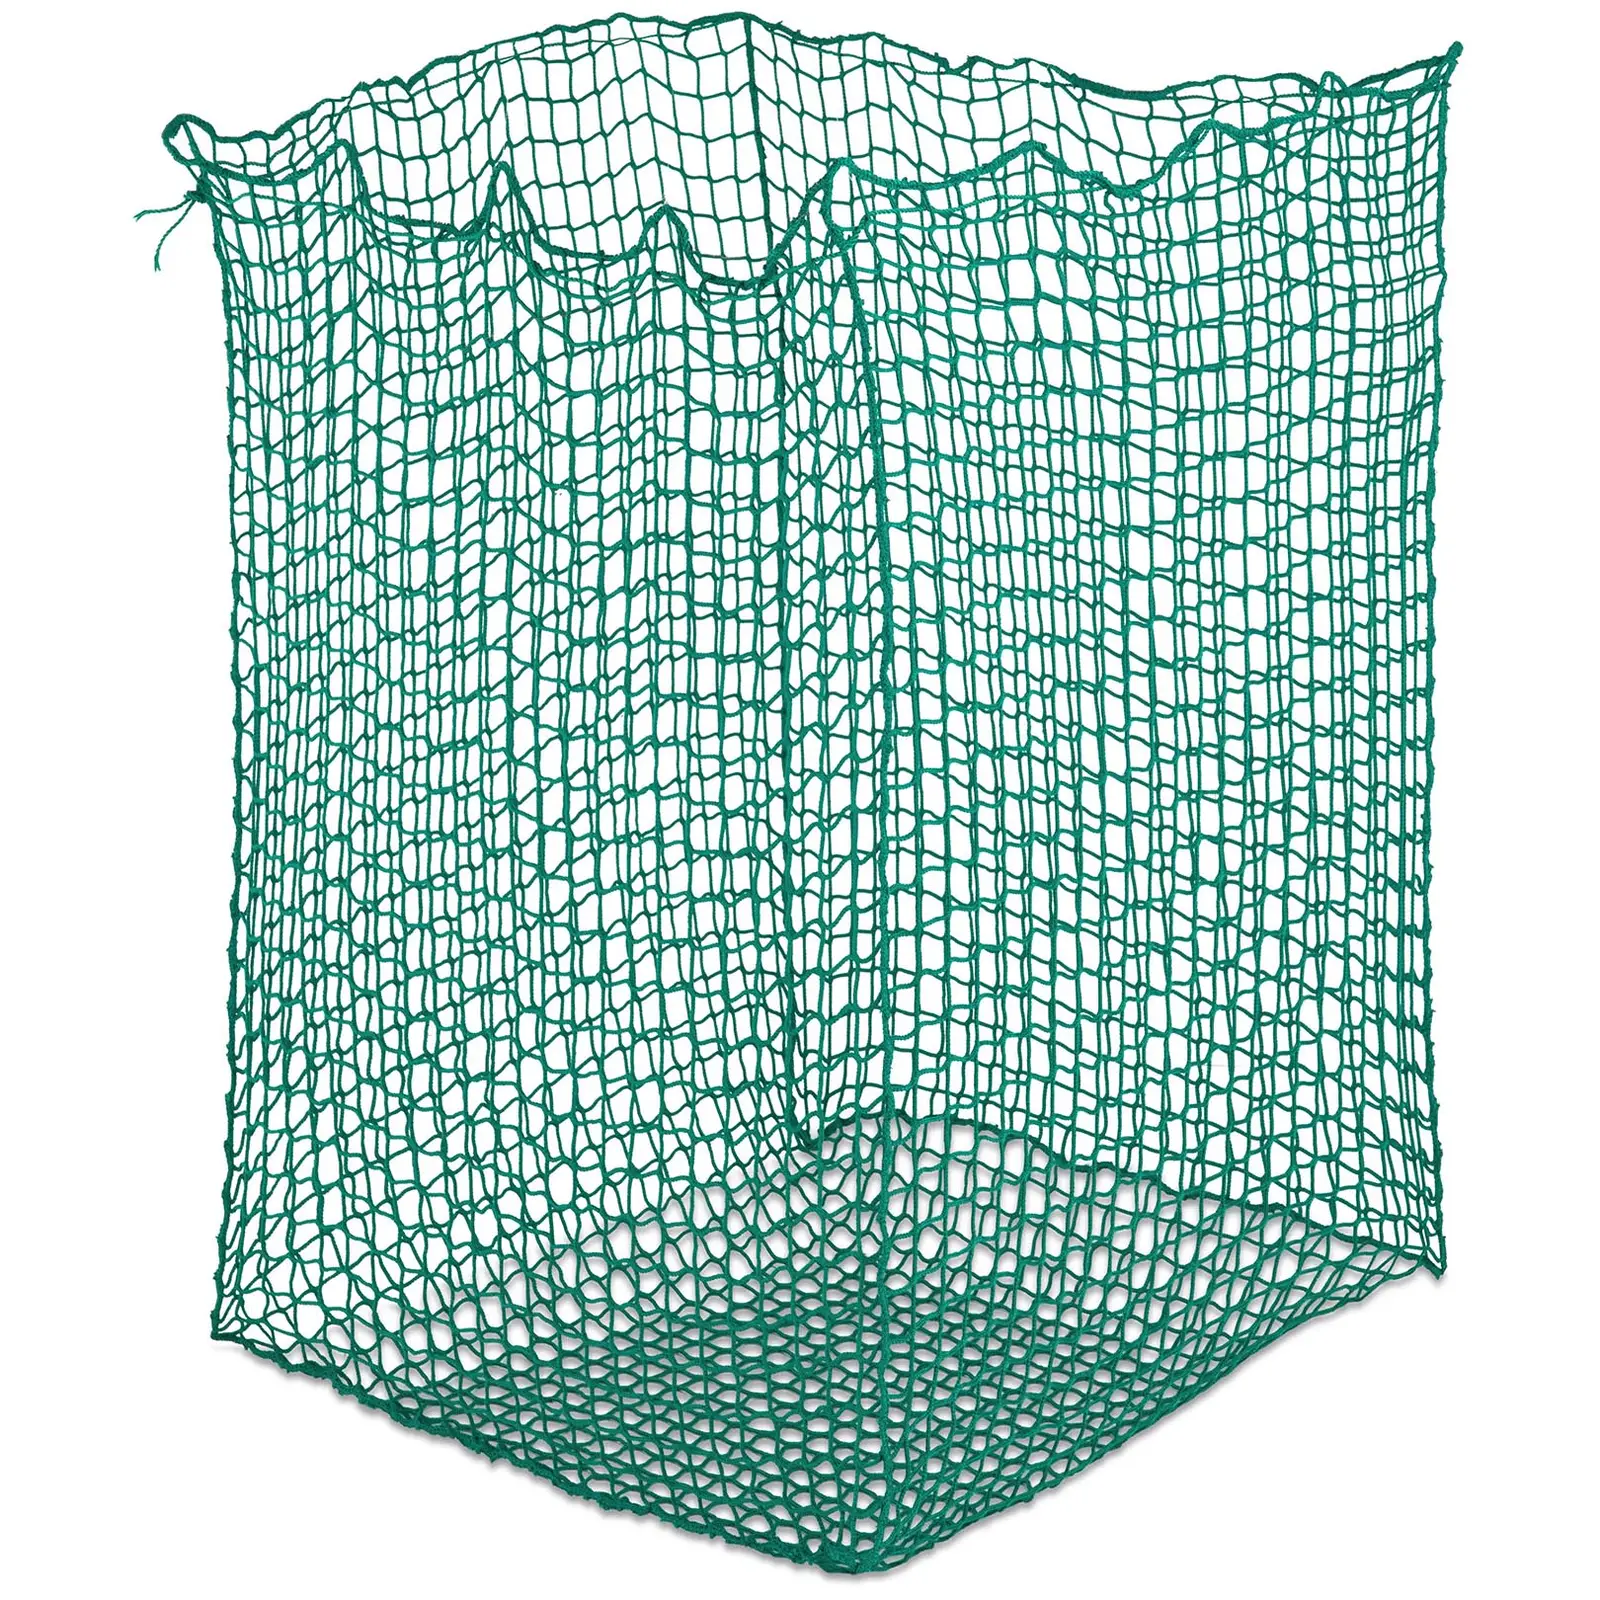 Round Bale Hay Net - 1,600 x 1,600 x 1,800 mm - mesh size: 45 x 45 mm - {{colour_34_old_temp}}